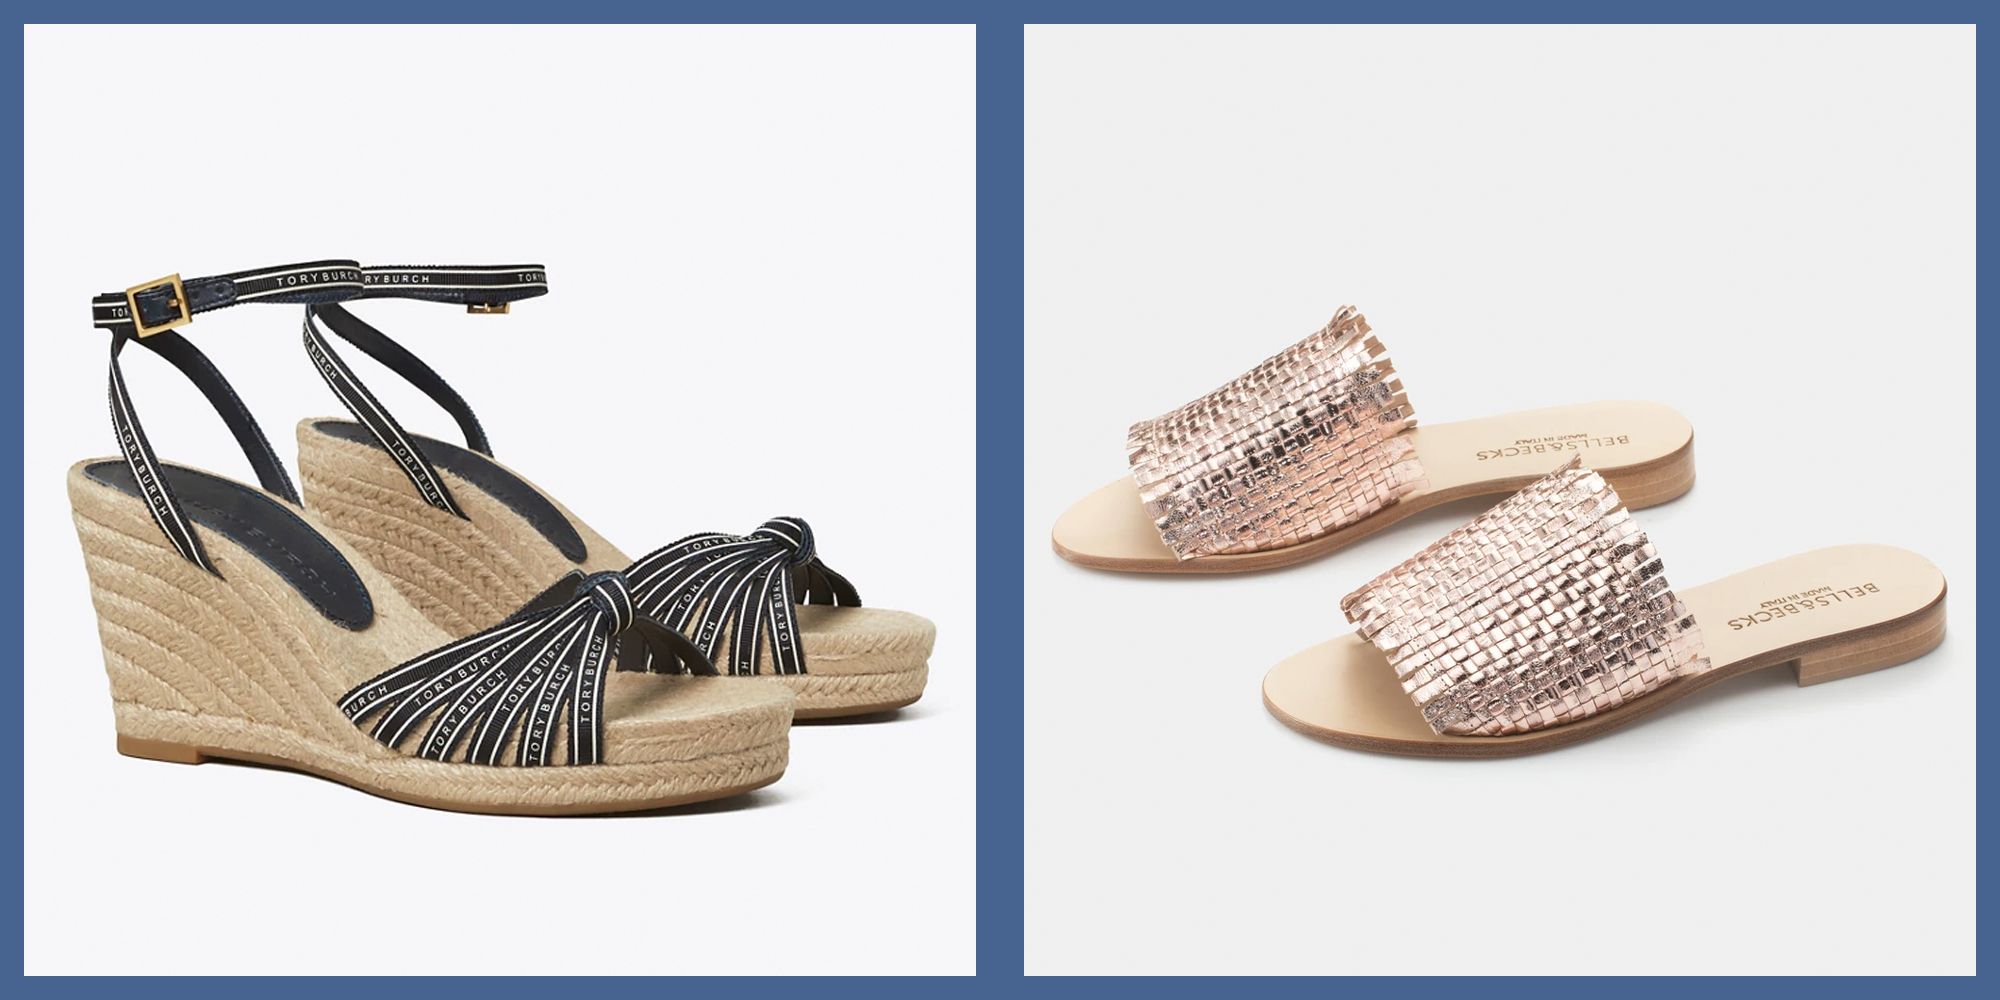 20 Cute Summer Shoes - The Best Shoes for Summer